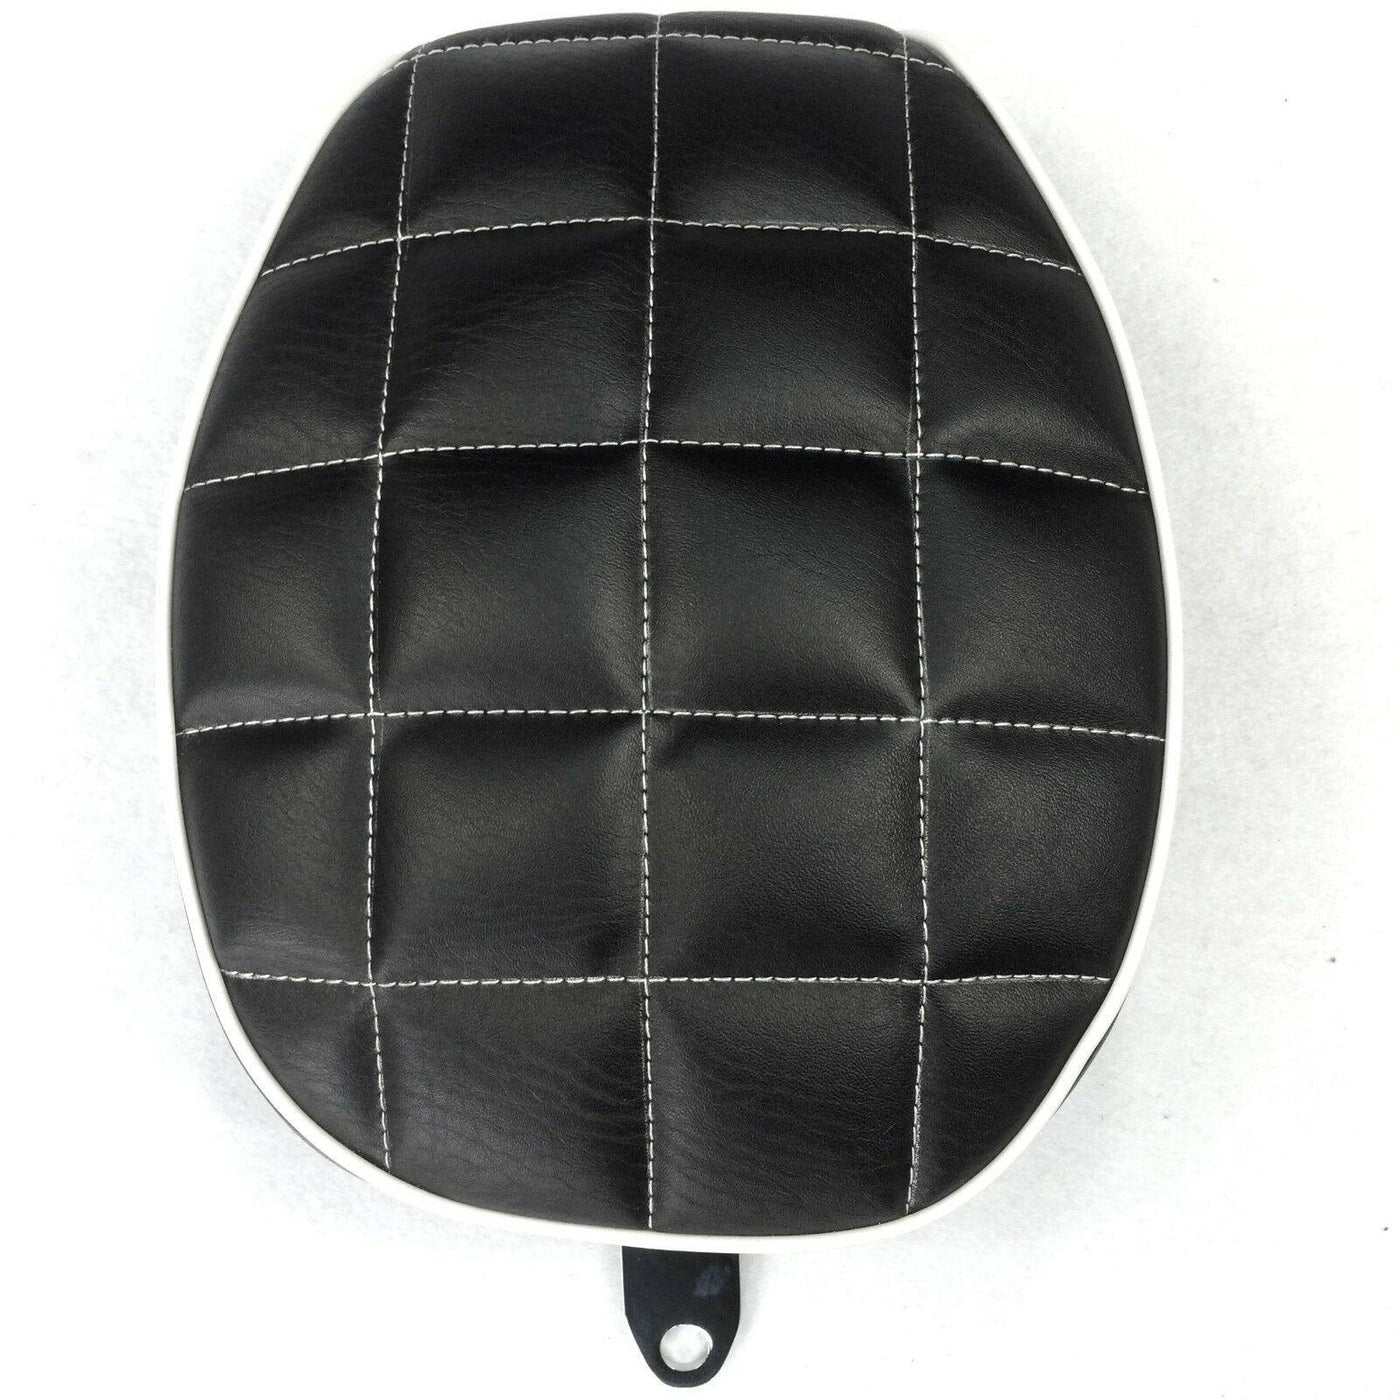 Black Custom Passenger Checks Style Leather Seat For Harley XL1200X X48 X72 - Moto Life Products